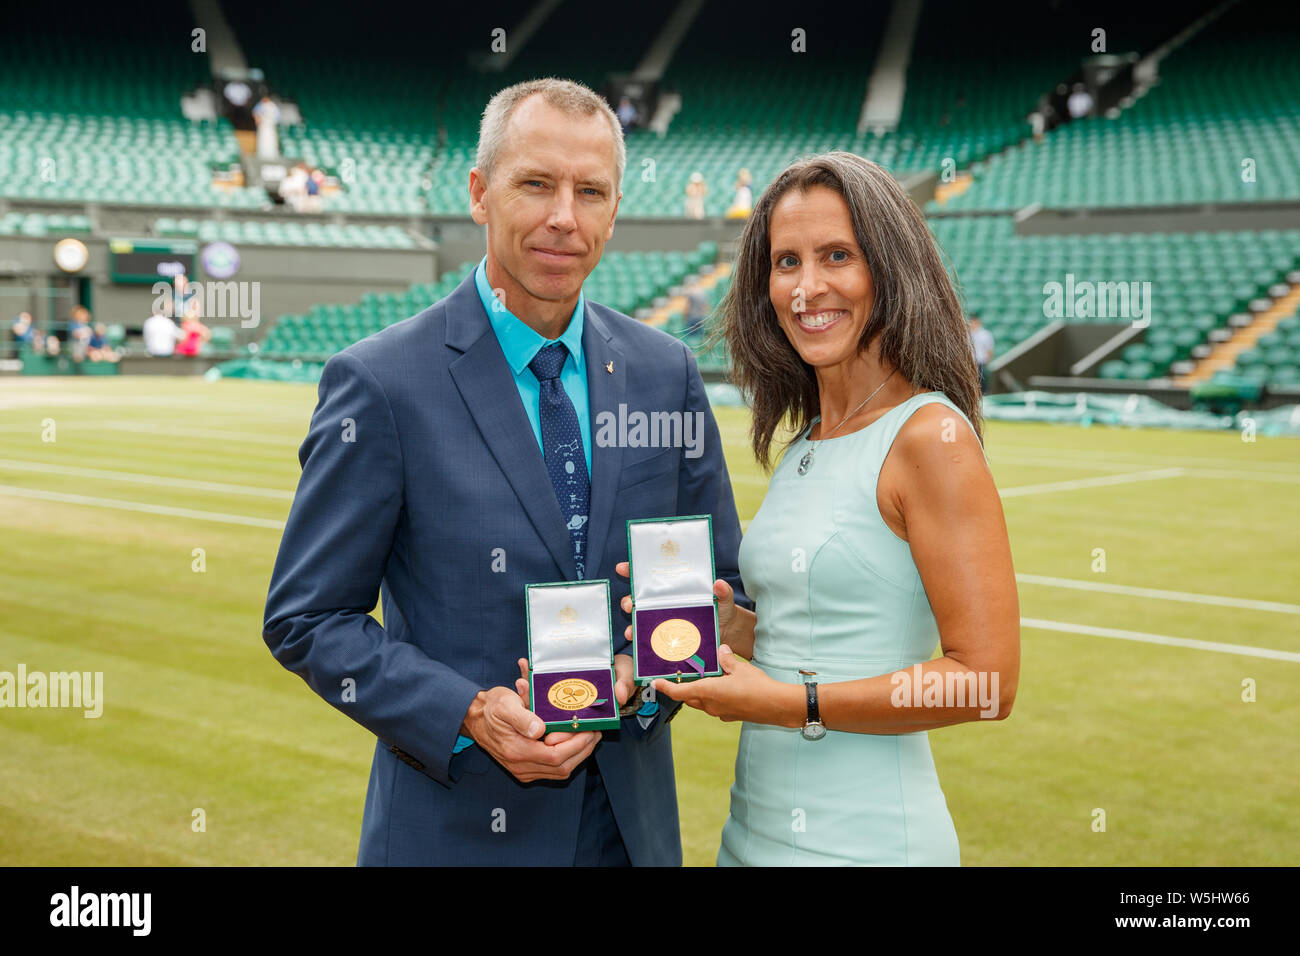 Astronaut Andrew 'Drew' Feustel with his wife Indira during The Championships at Wimbledon 2019. Stock Photo